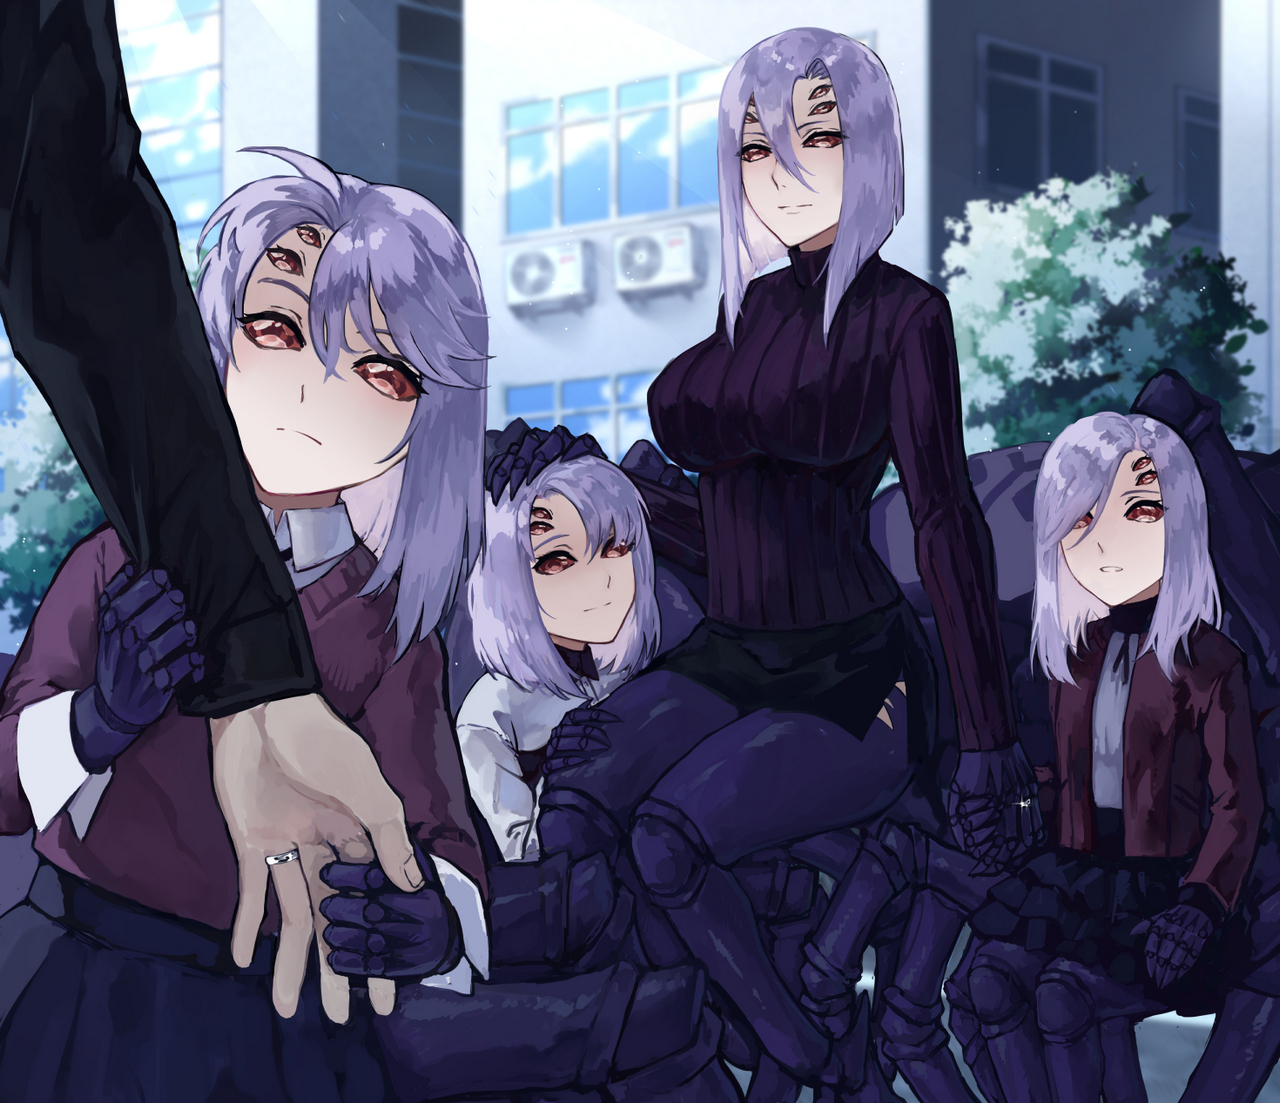 Zakirsiz Sex With Rachnera Is Great But Have You Ever Thought About Starting A Famil